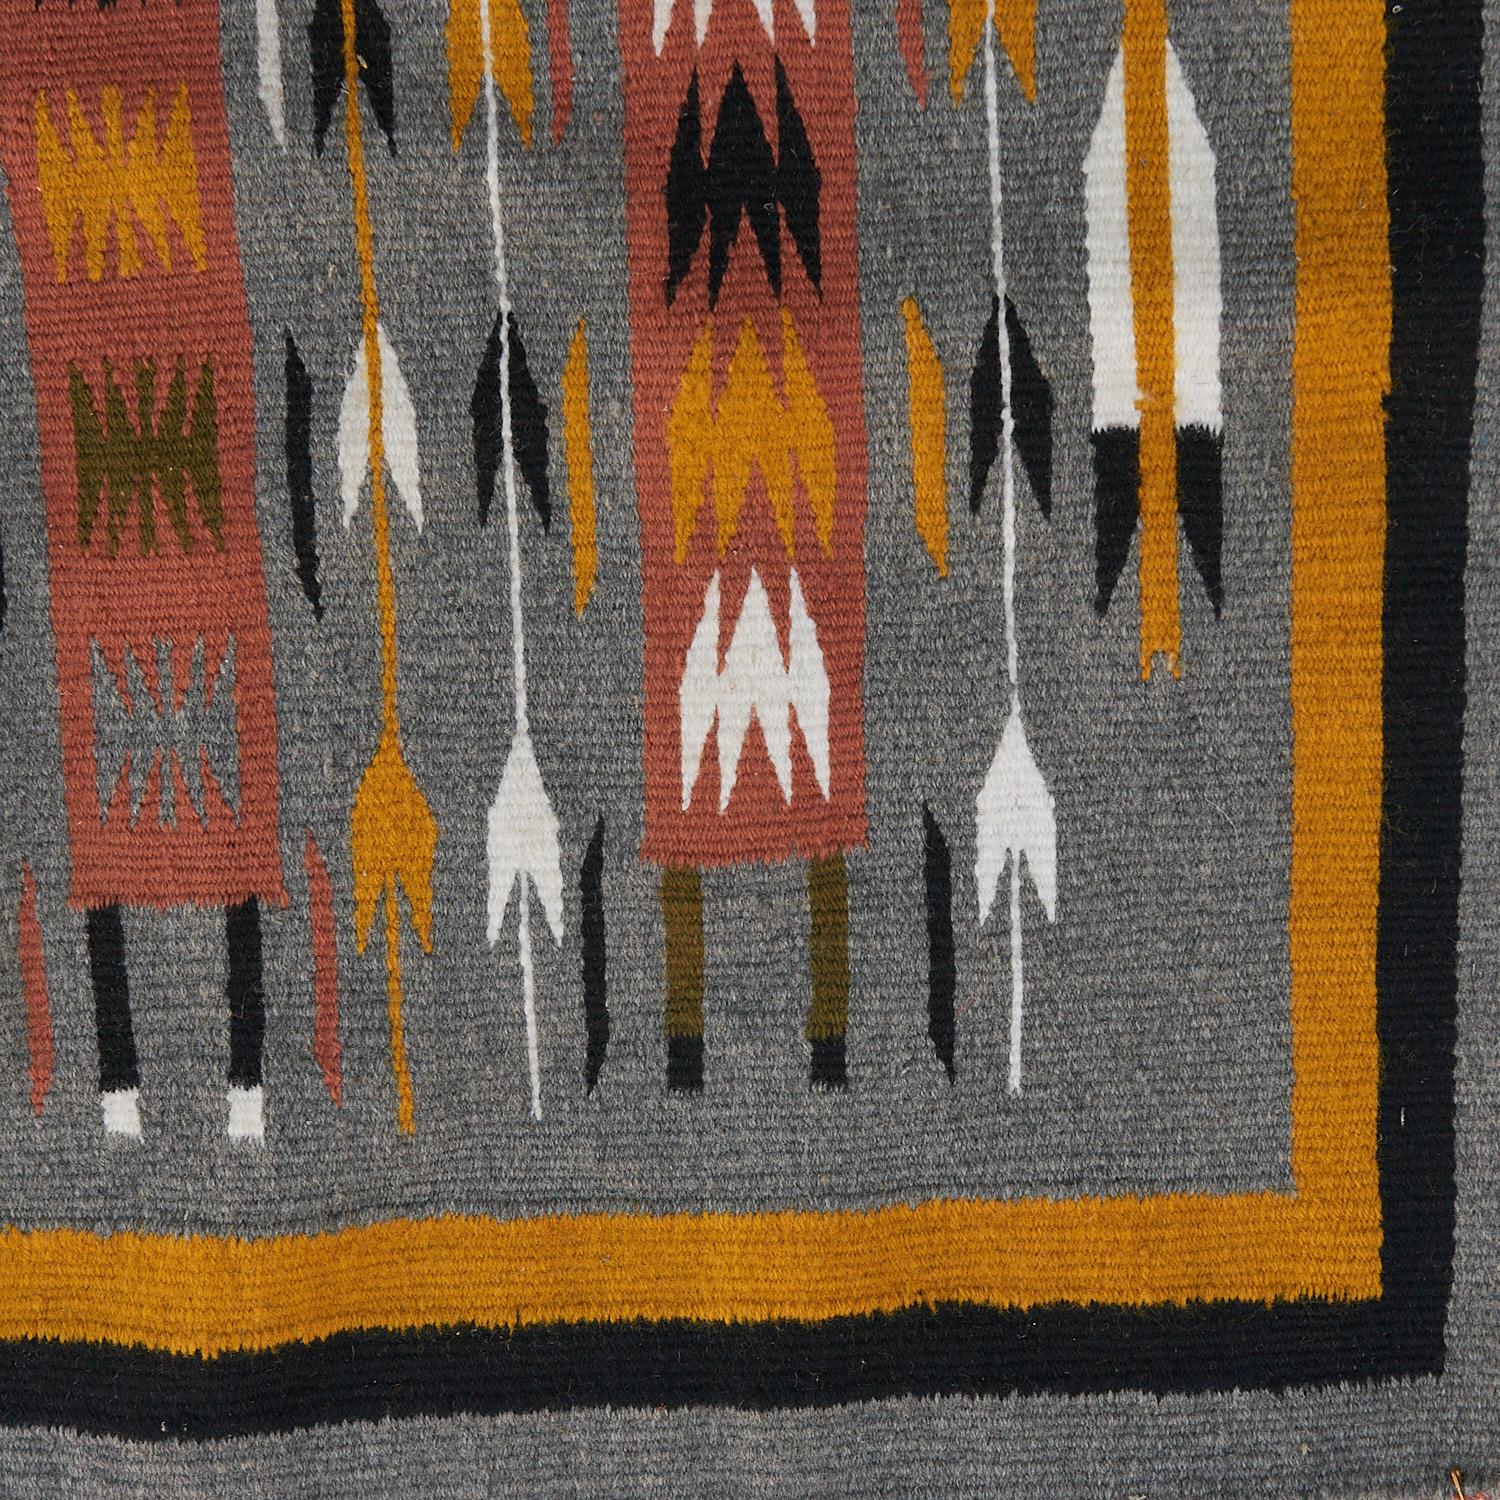 20th c., American Southwest, Navajo Yei hand-woven wool textile depicting four Yei Be Chei figures separated by corn stalks and enclosed on three sides by a Sky Guardian. The square heads of the figures indicate they are female. Male figures